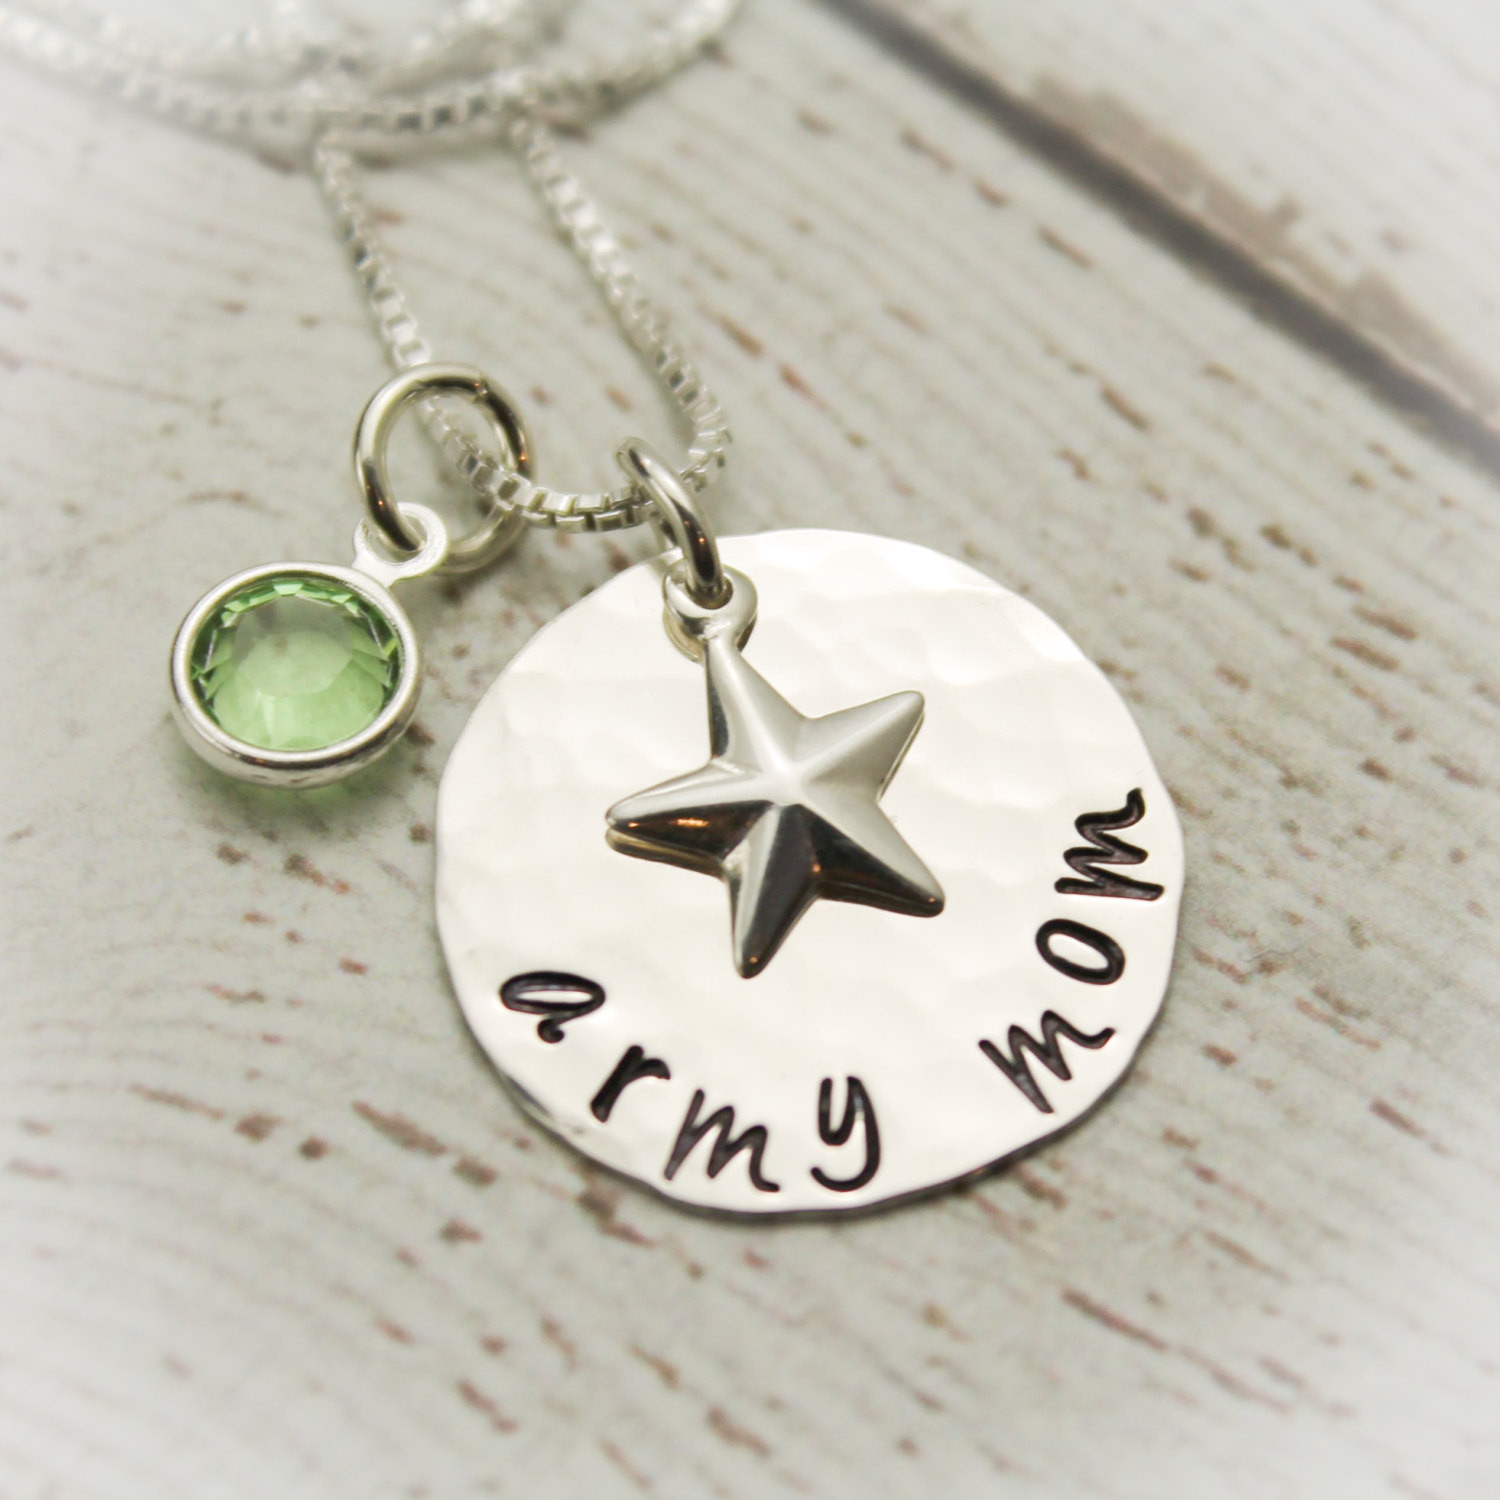 Charm Necklace For Mom
 Army Mom Necklace in Sterling Silver with Star Charm and